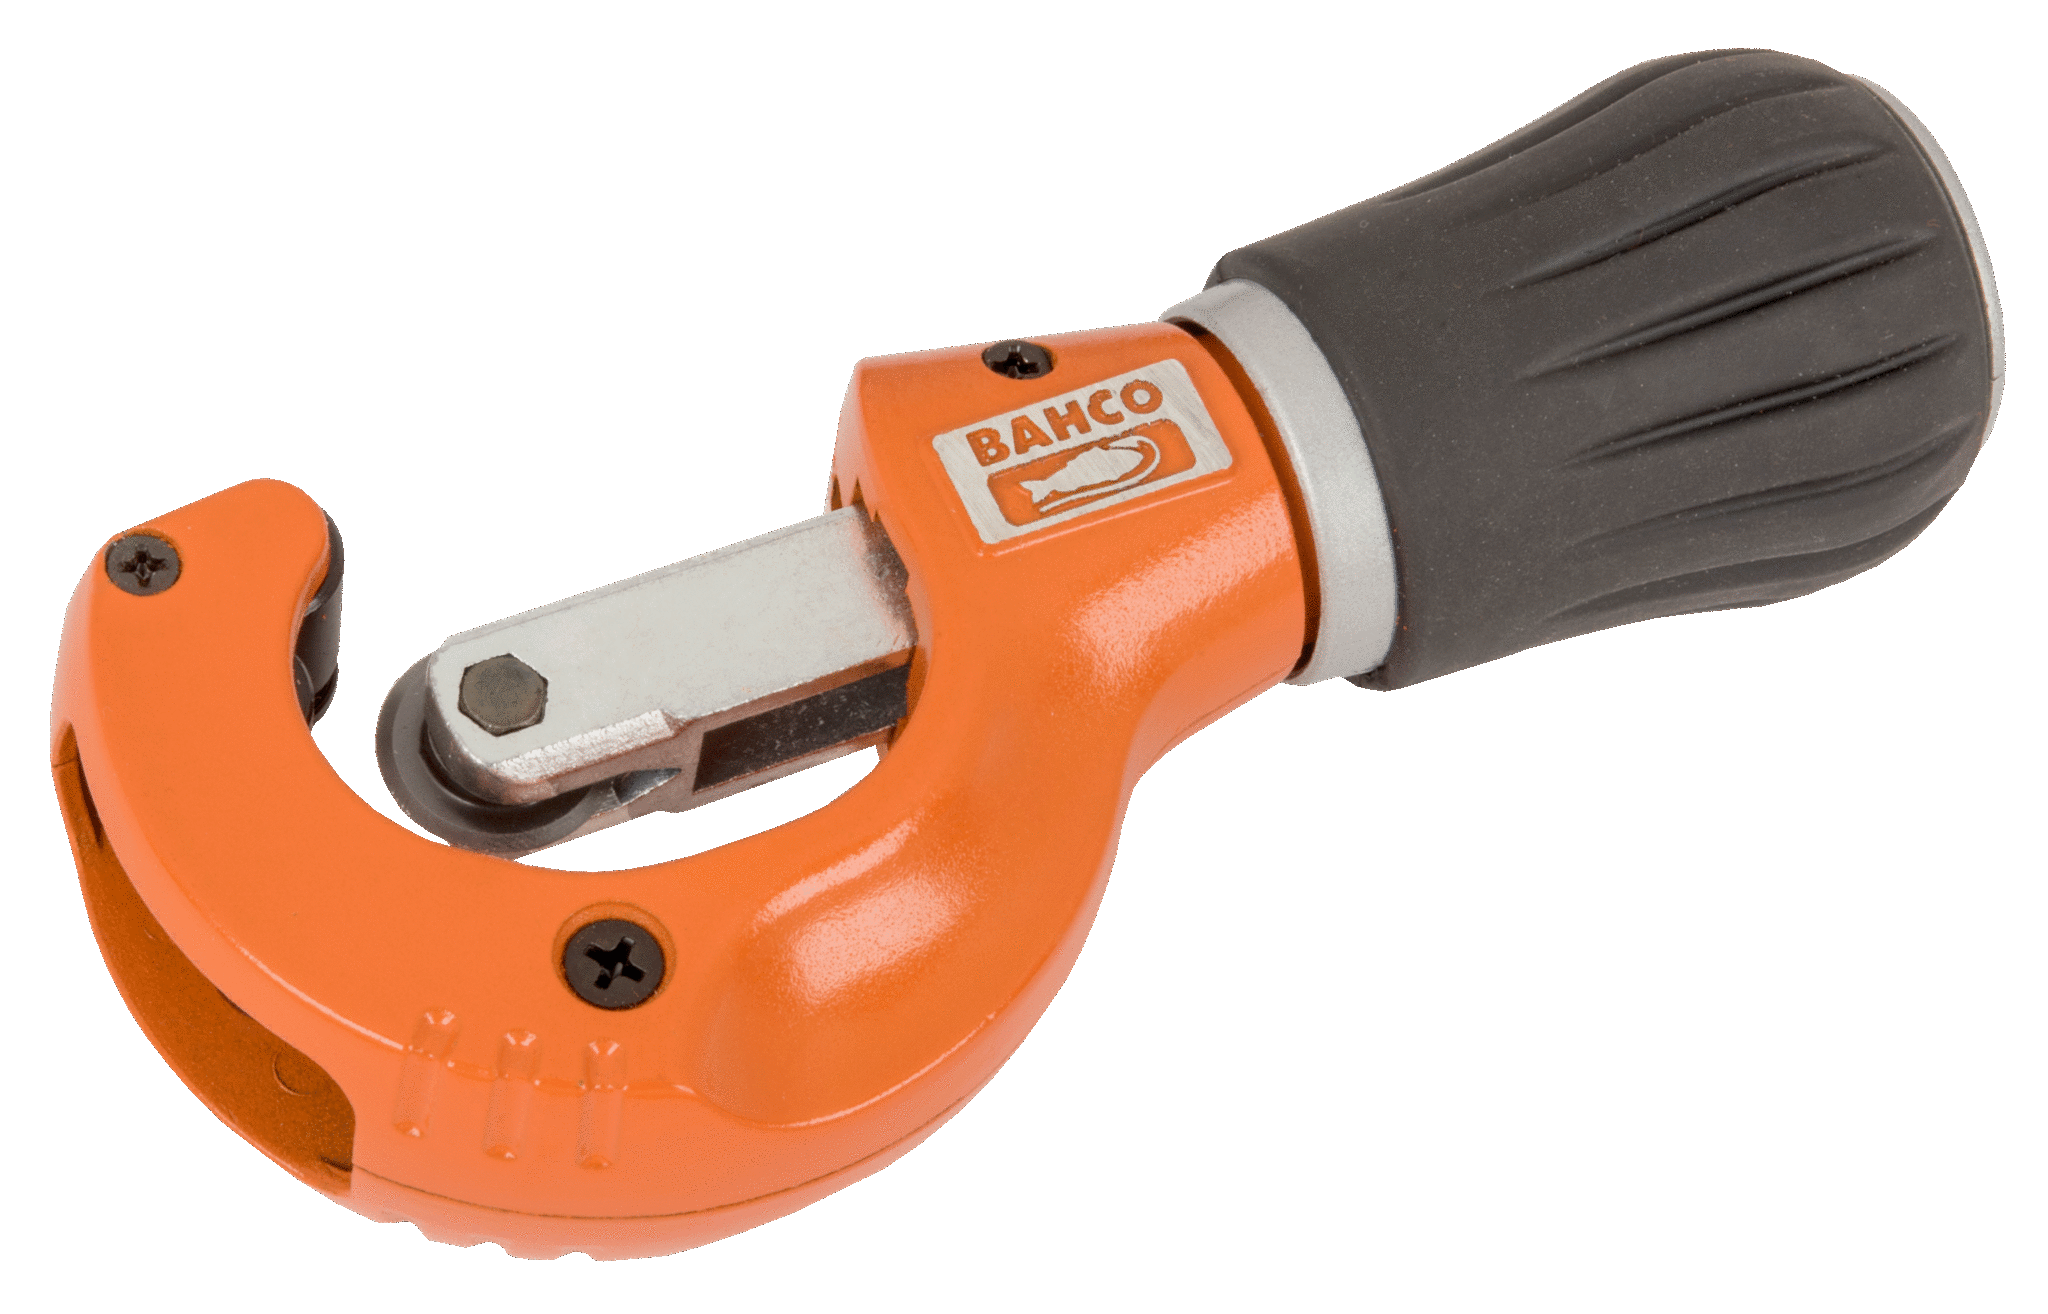 Tube Cutter 8-35 mm - 302-35 by Bahco